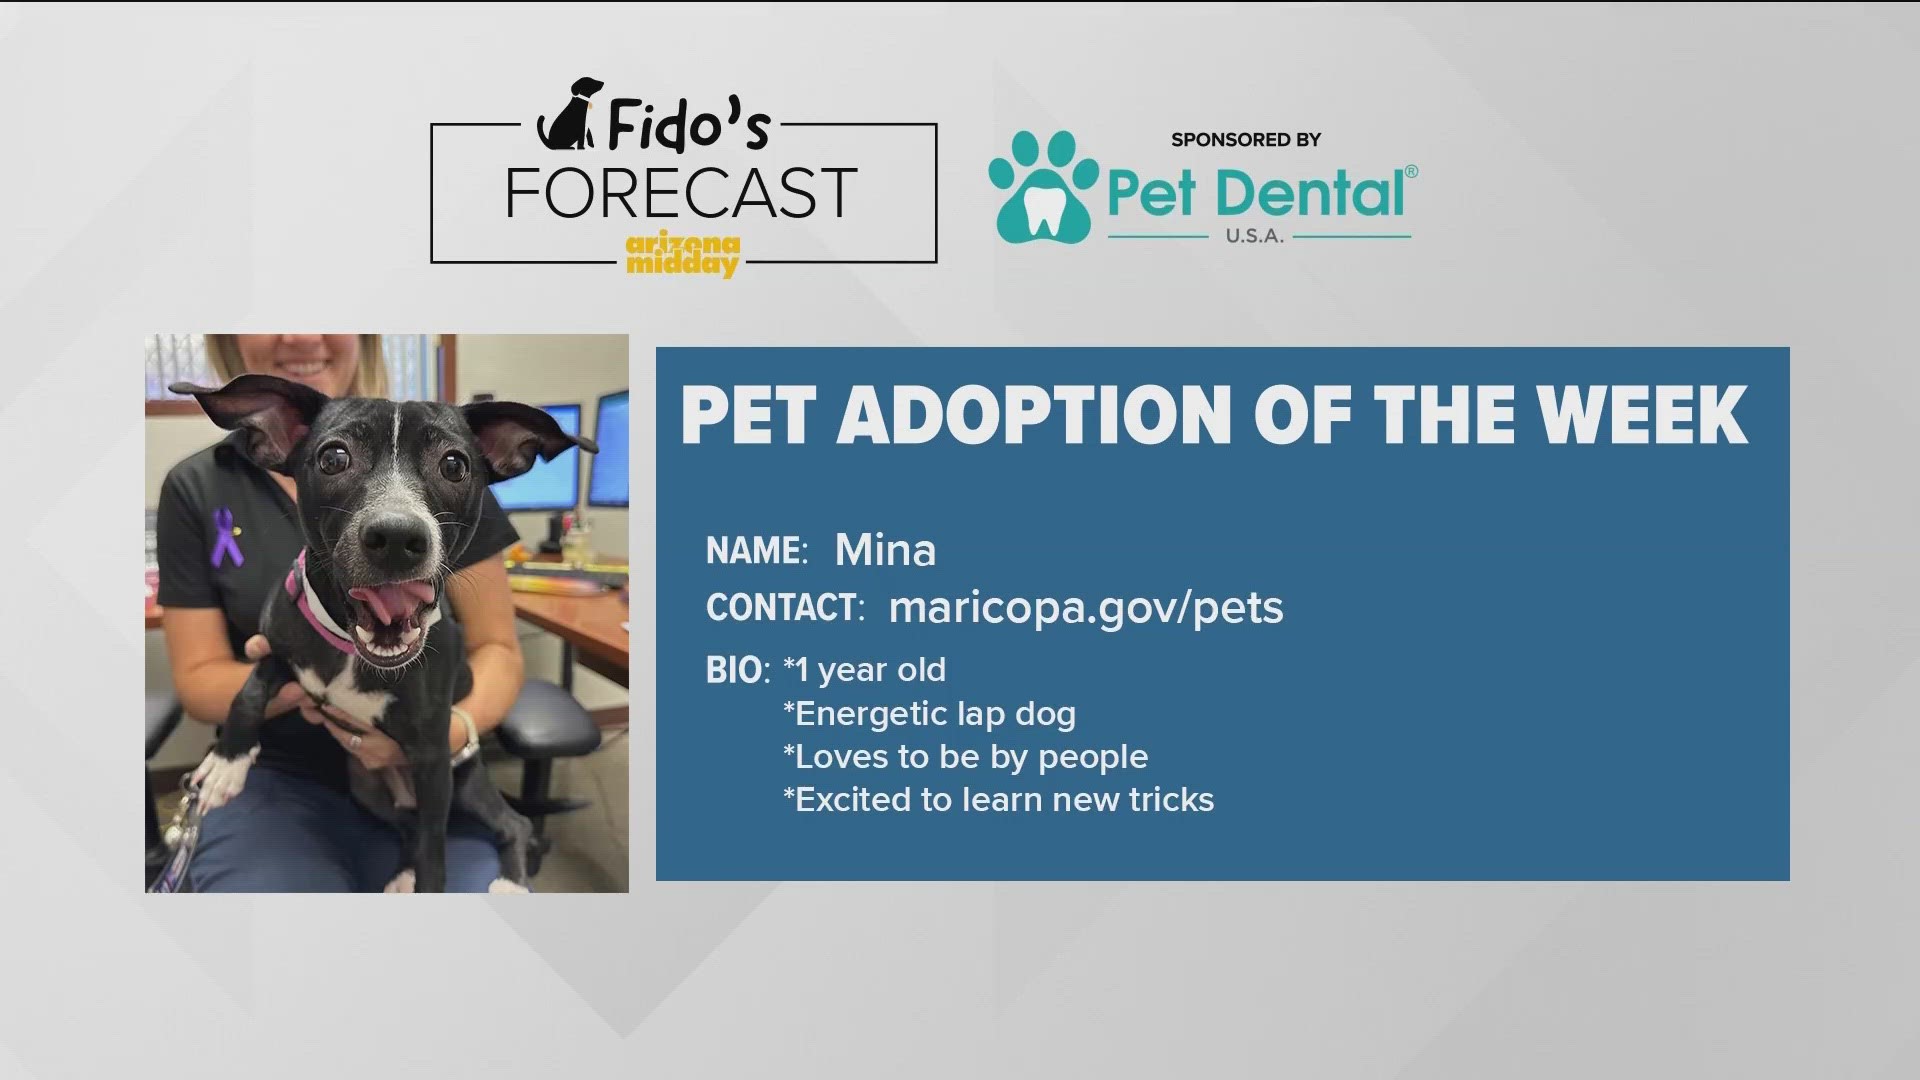 Maricopa Animal Care & Control brought Mina to find her ‘furever’ home and to help Krystle with this weekend's Fido's Forecast.